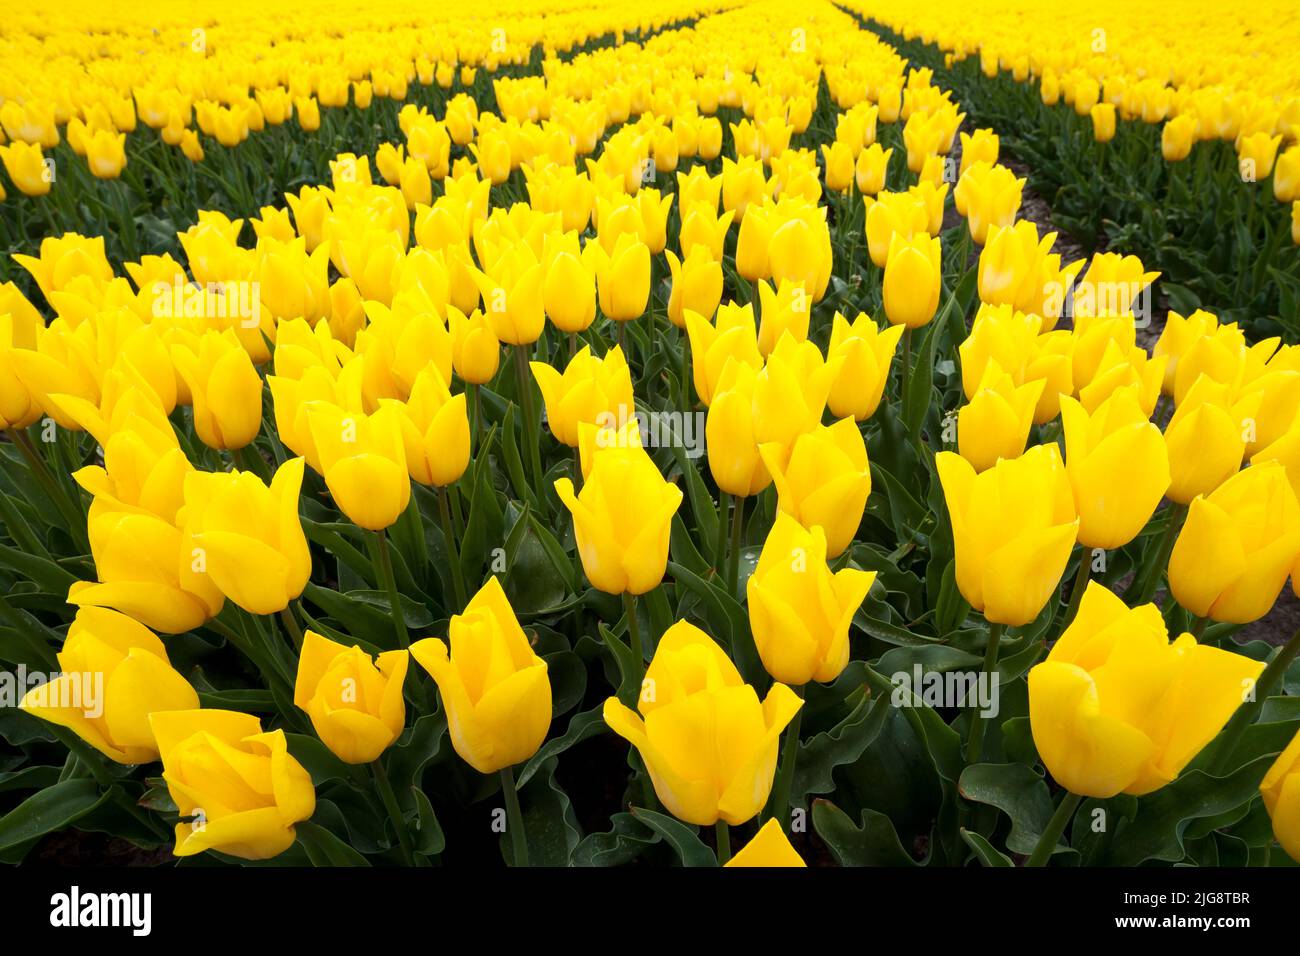 Field of yellow tulips, North Holland, Netherlands Stock Photo